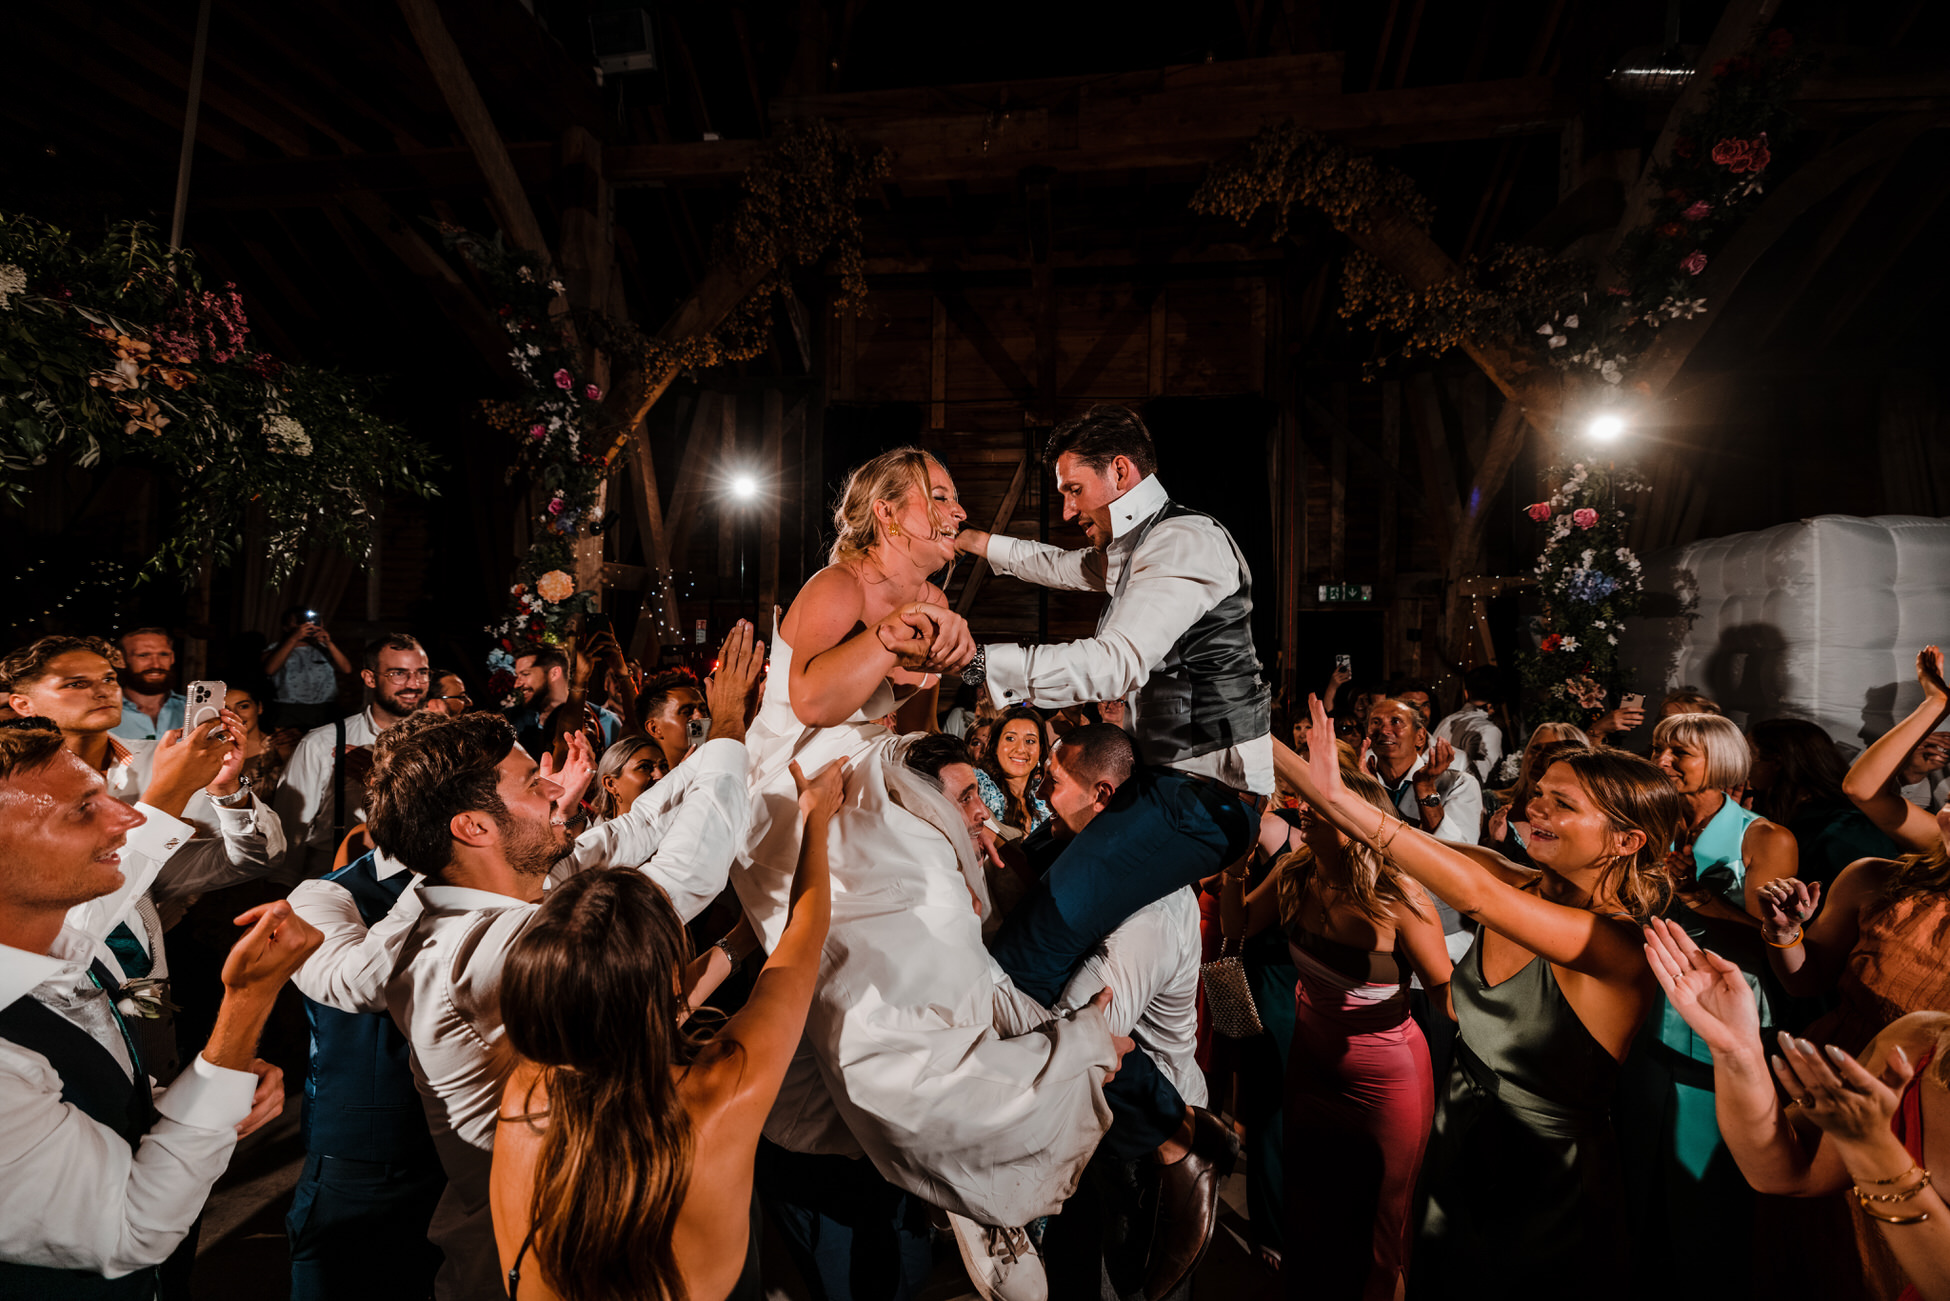 A bride and groom are lifted onto their friends' shoulders in the middle of a packed dance floor! Photo by Tom Hodgson